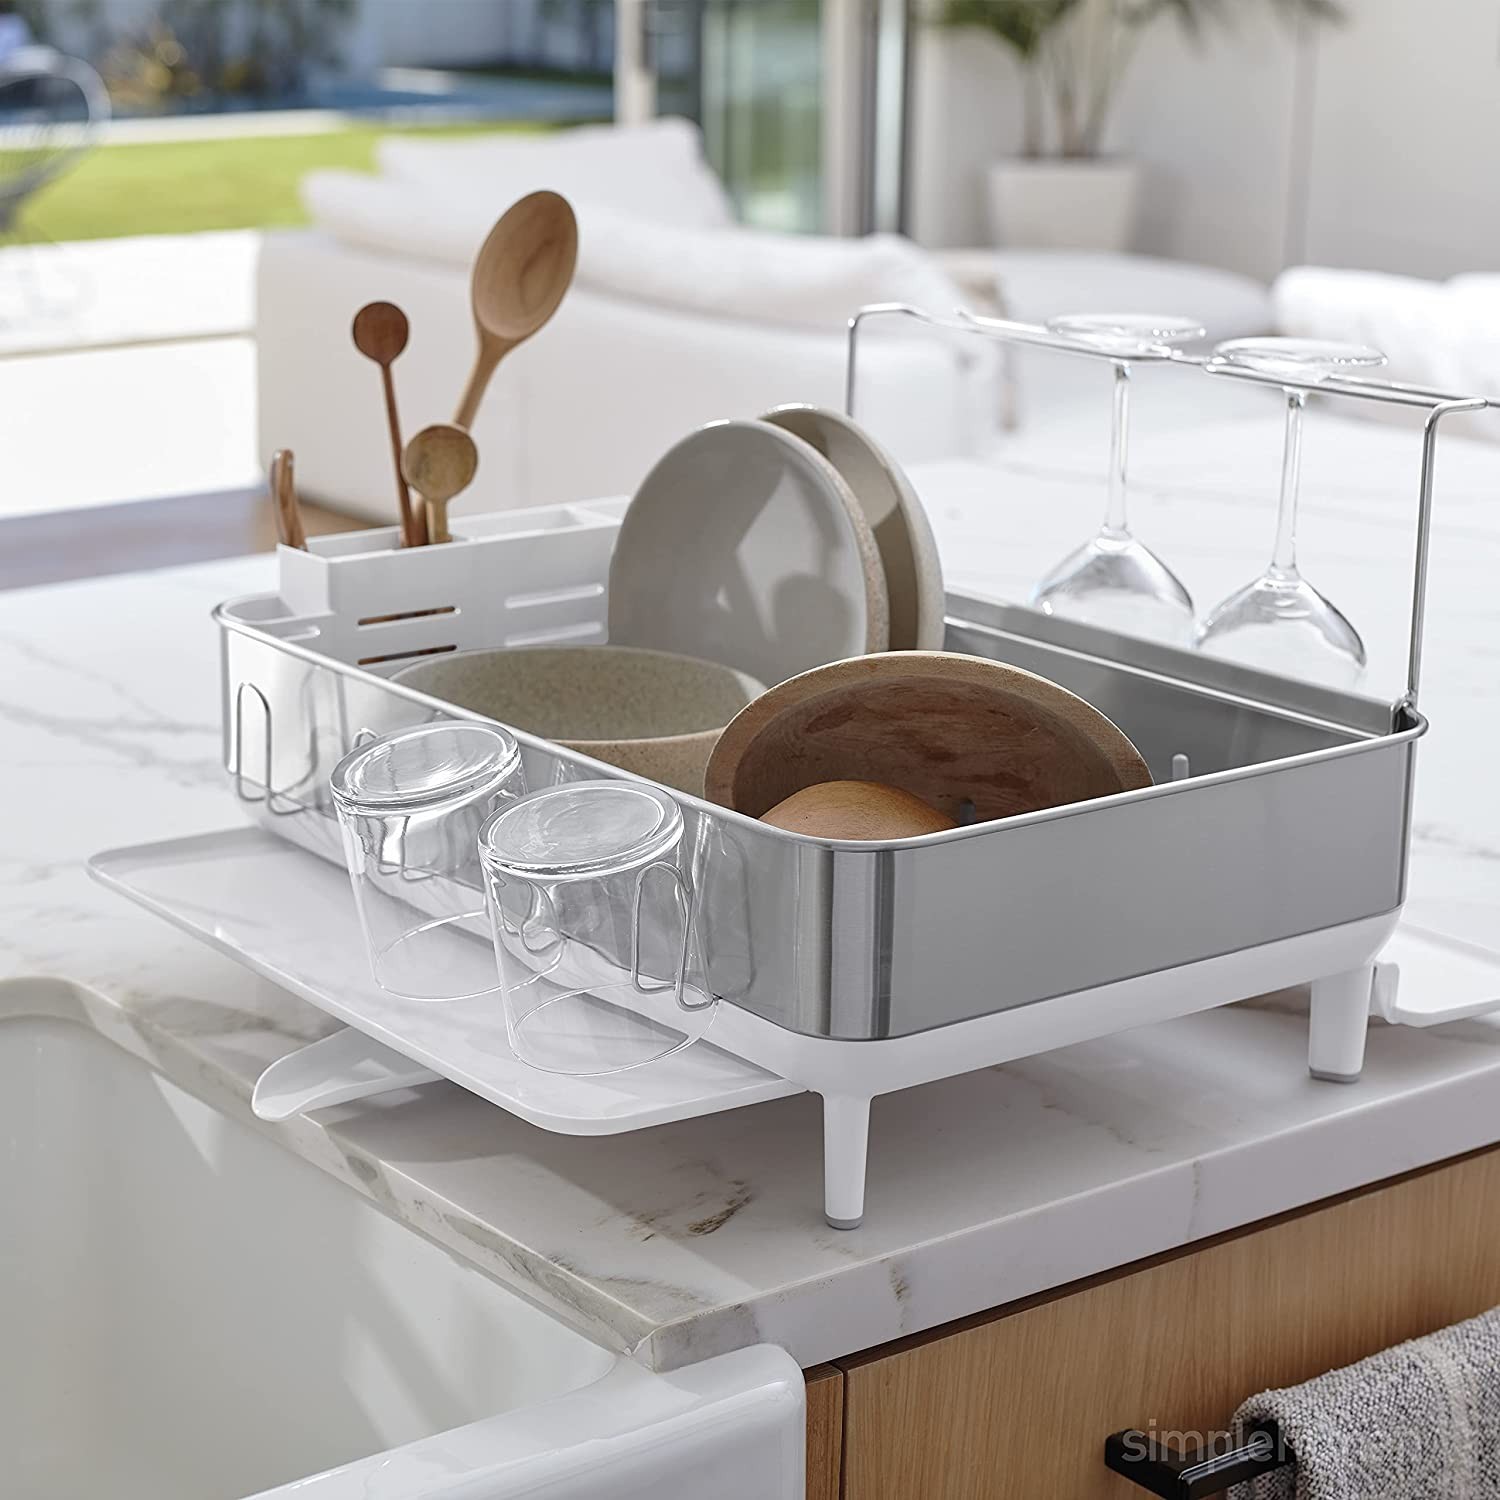 Dish drying rack, stainless steel, 56.6 x 51.4 x 29.2 cm